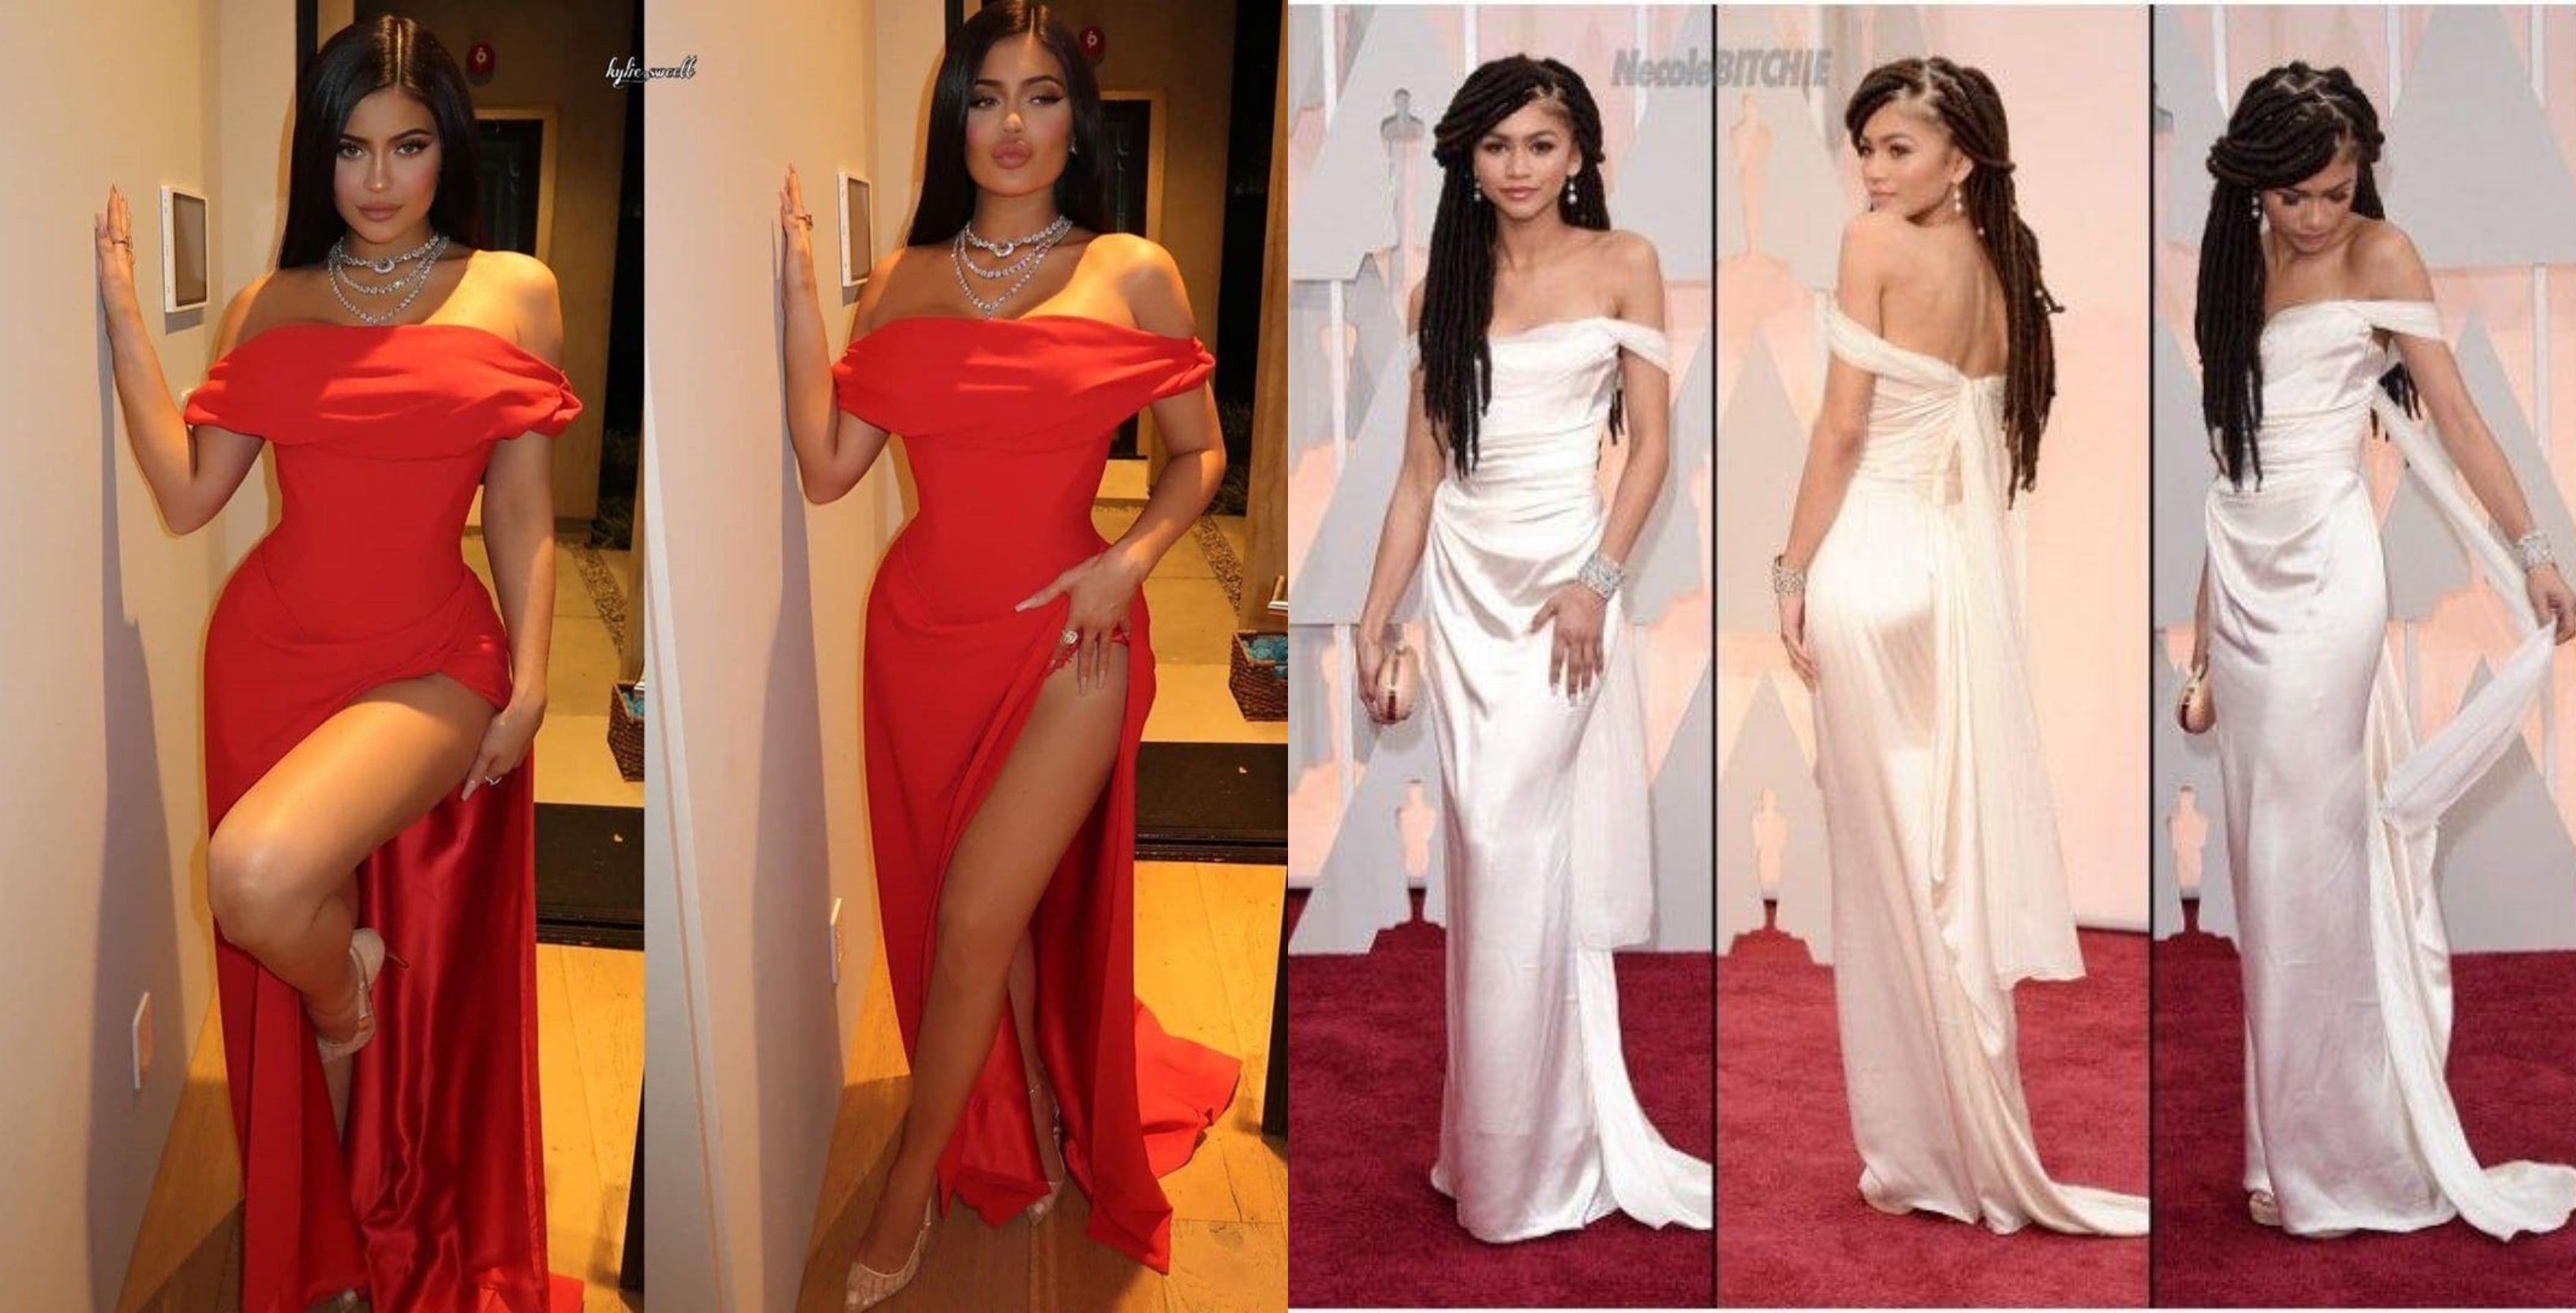 Celebrity-Like Prom Dresses - Zendaya or Kylie, Who's Your Favorite?